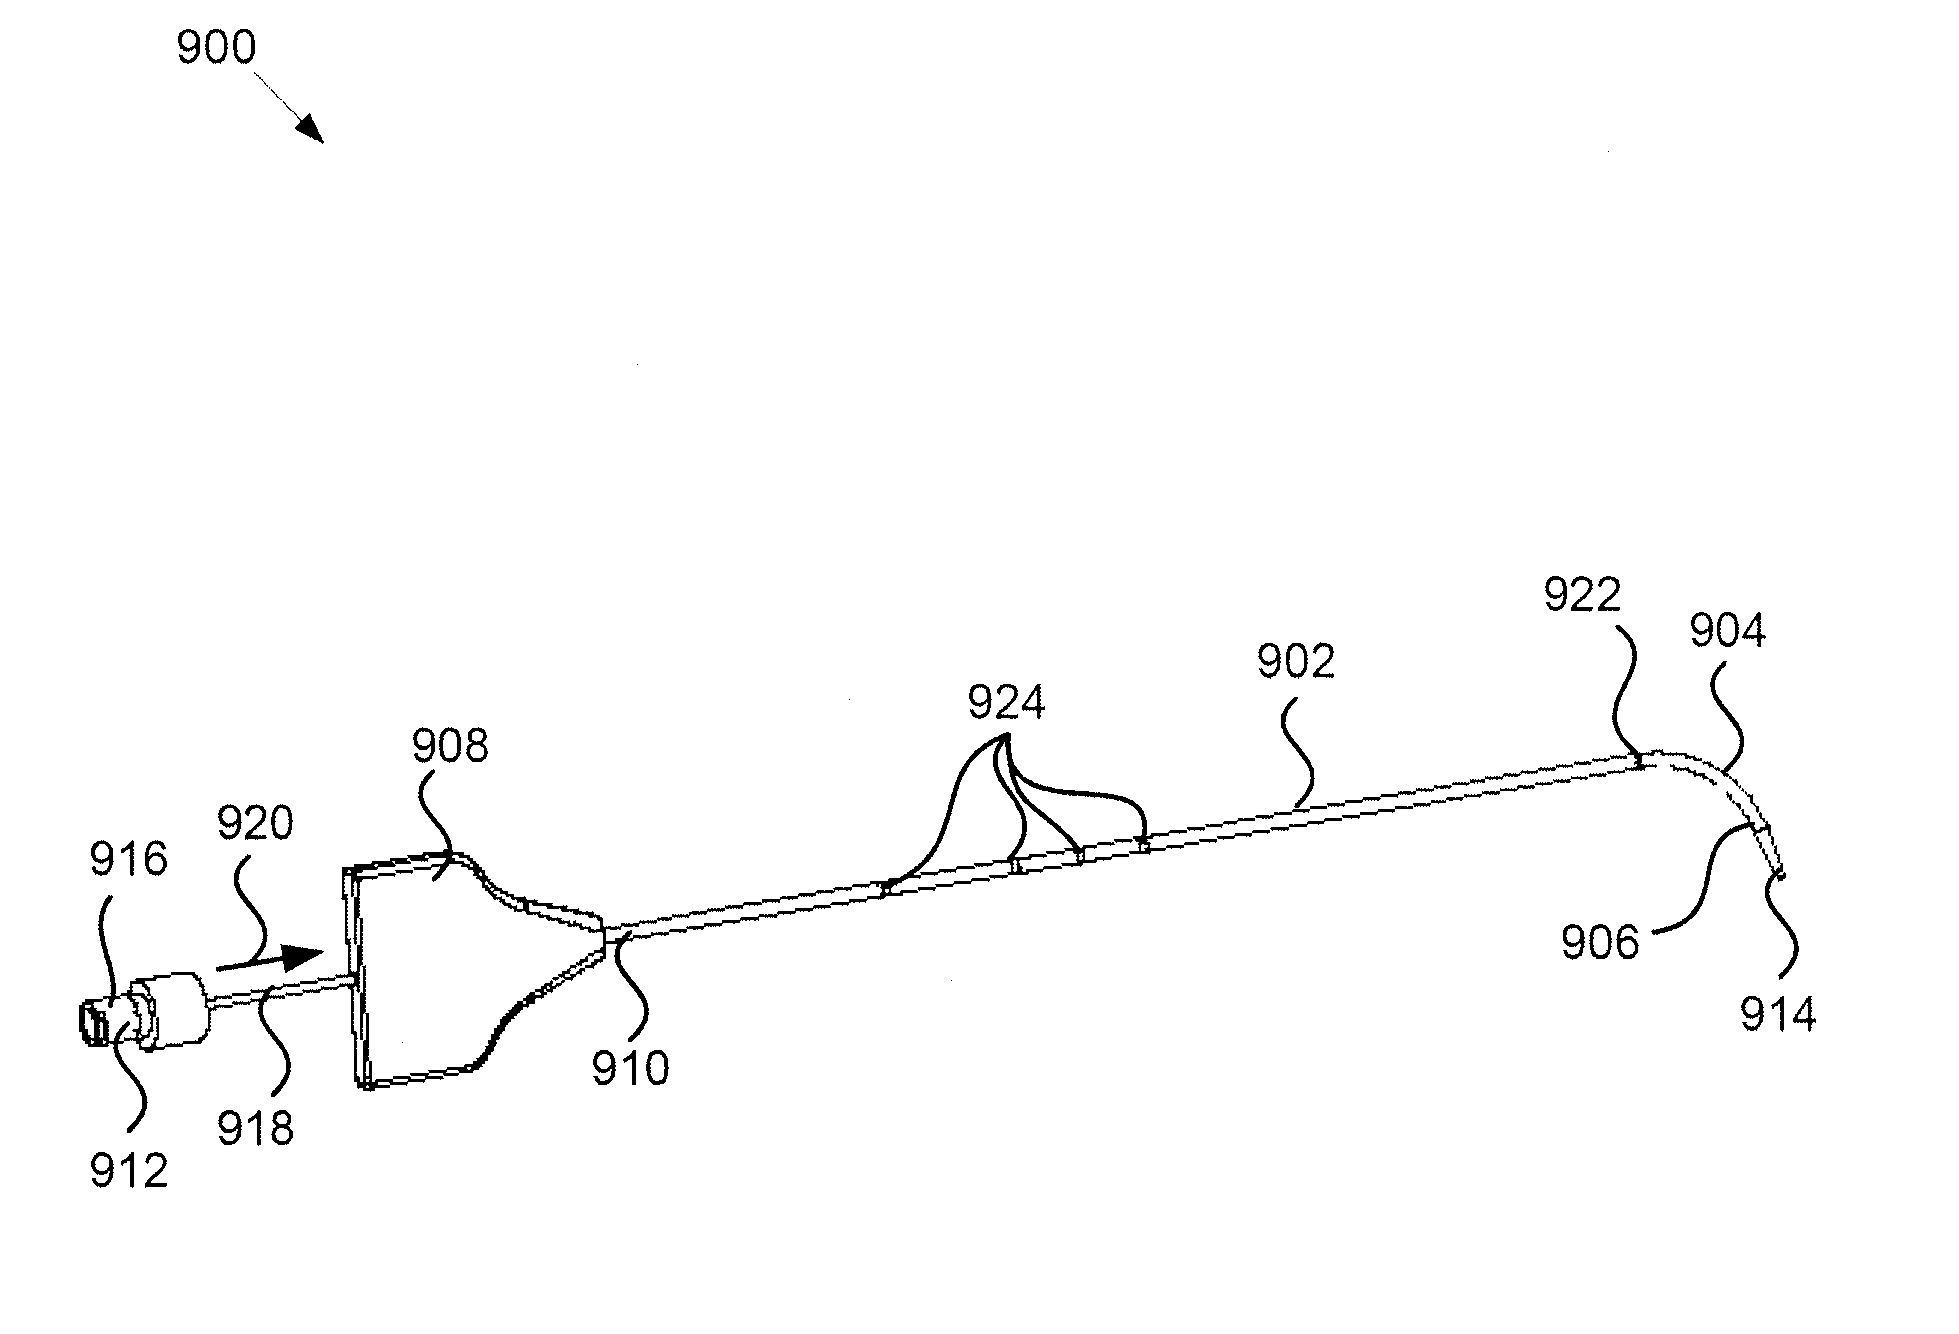 Apparatus, system, and method for treating atypical headaches